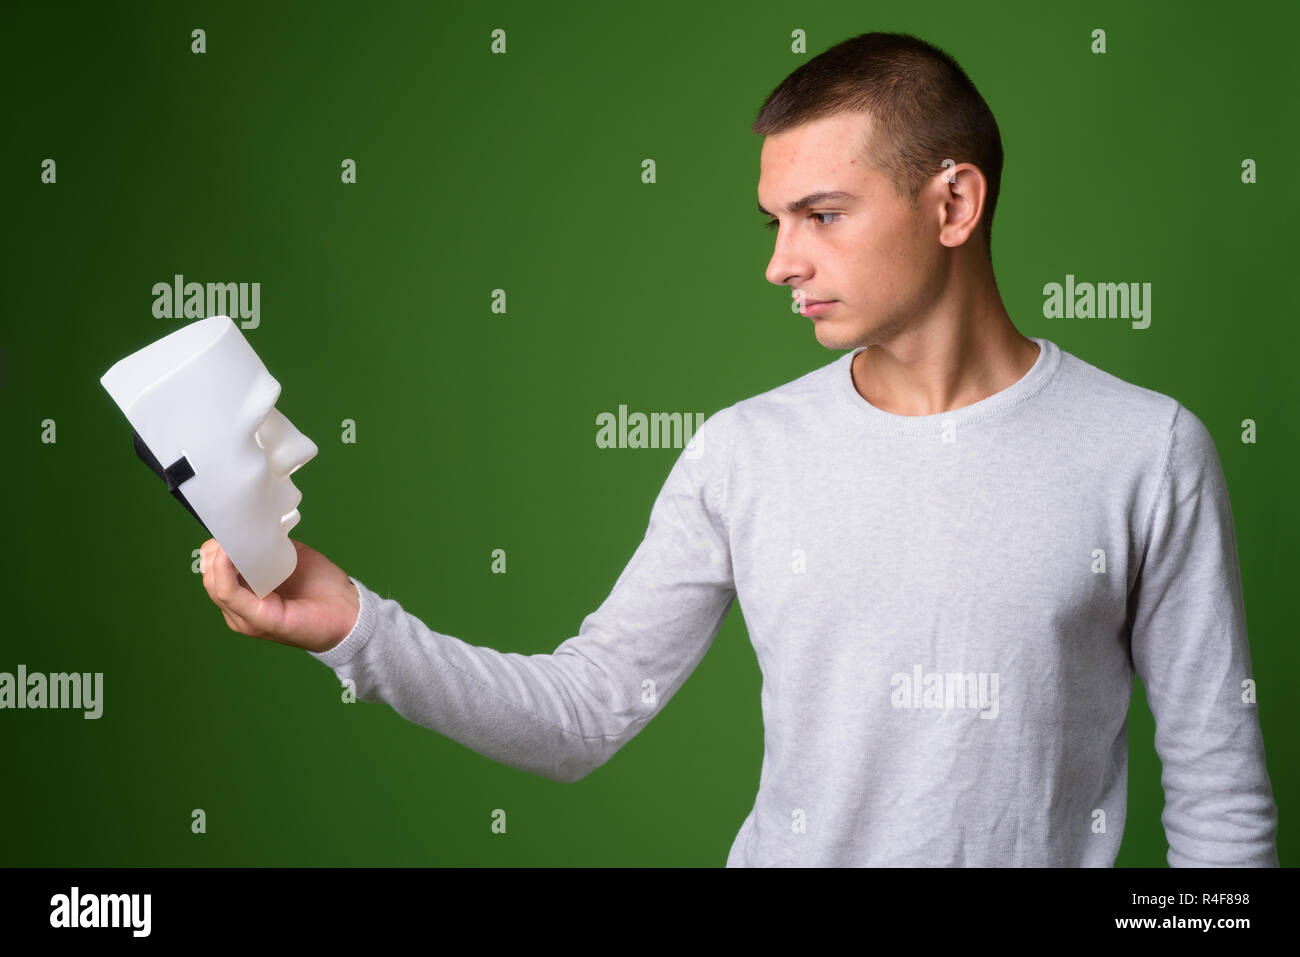 Studio shot of young handsome man against green background Stock Photo